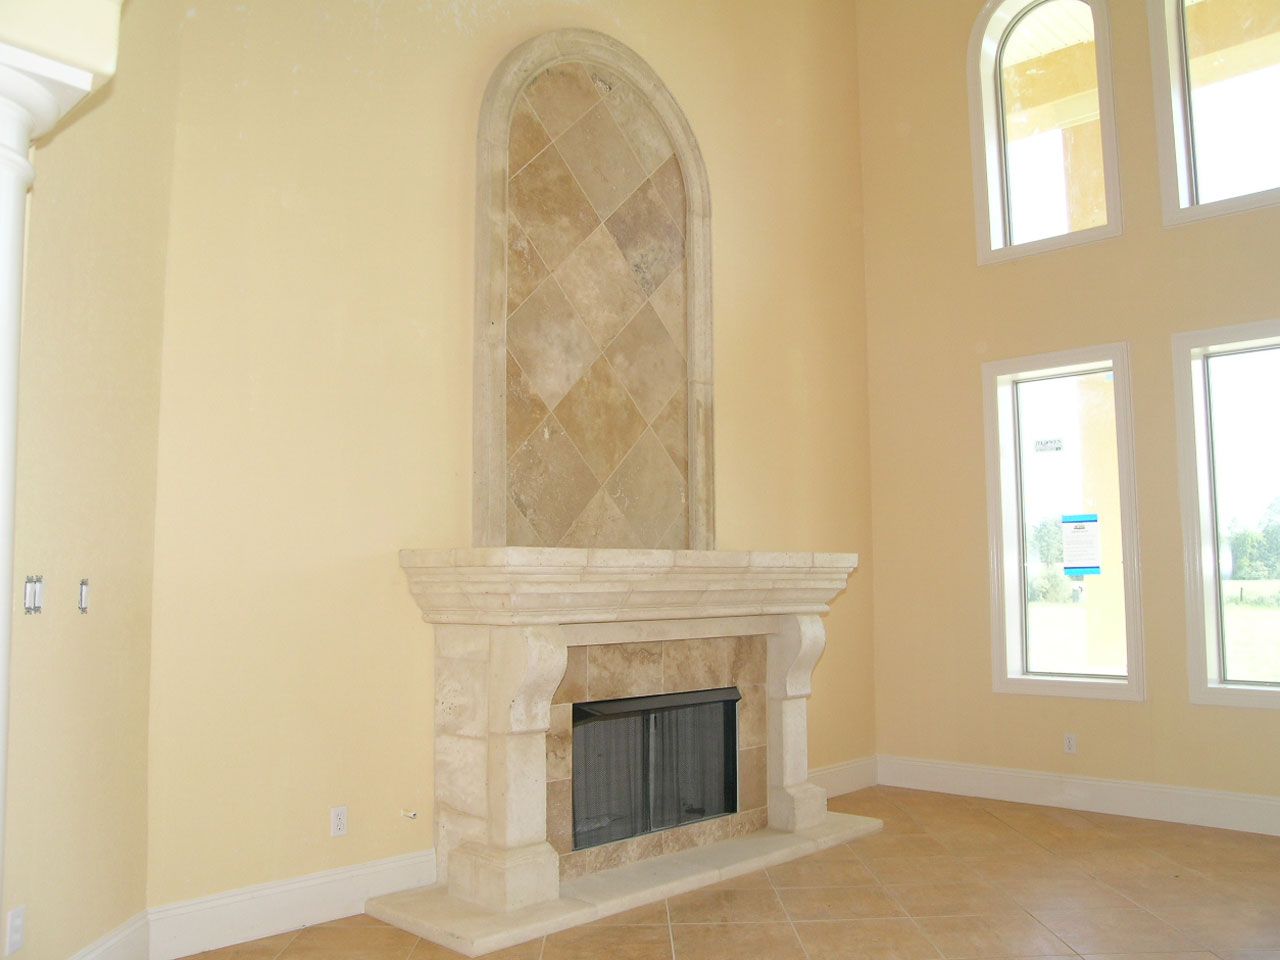 cast stone fireplace by Acorn Fine Homes